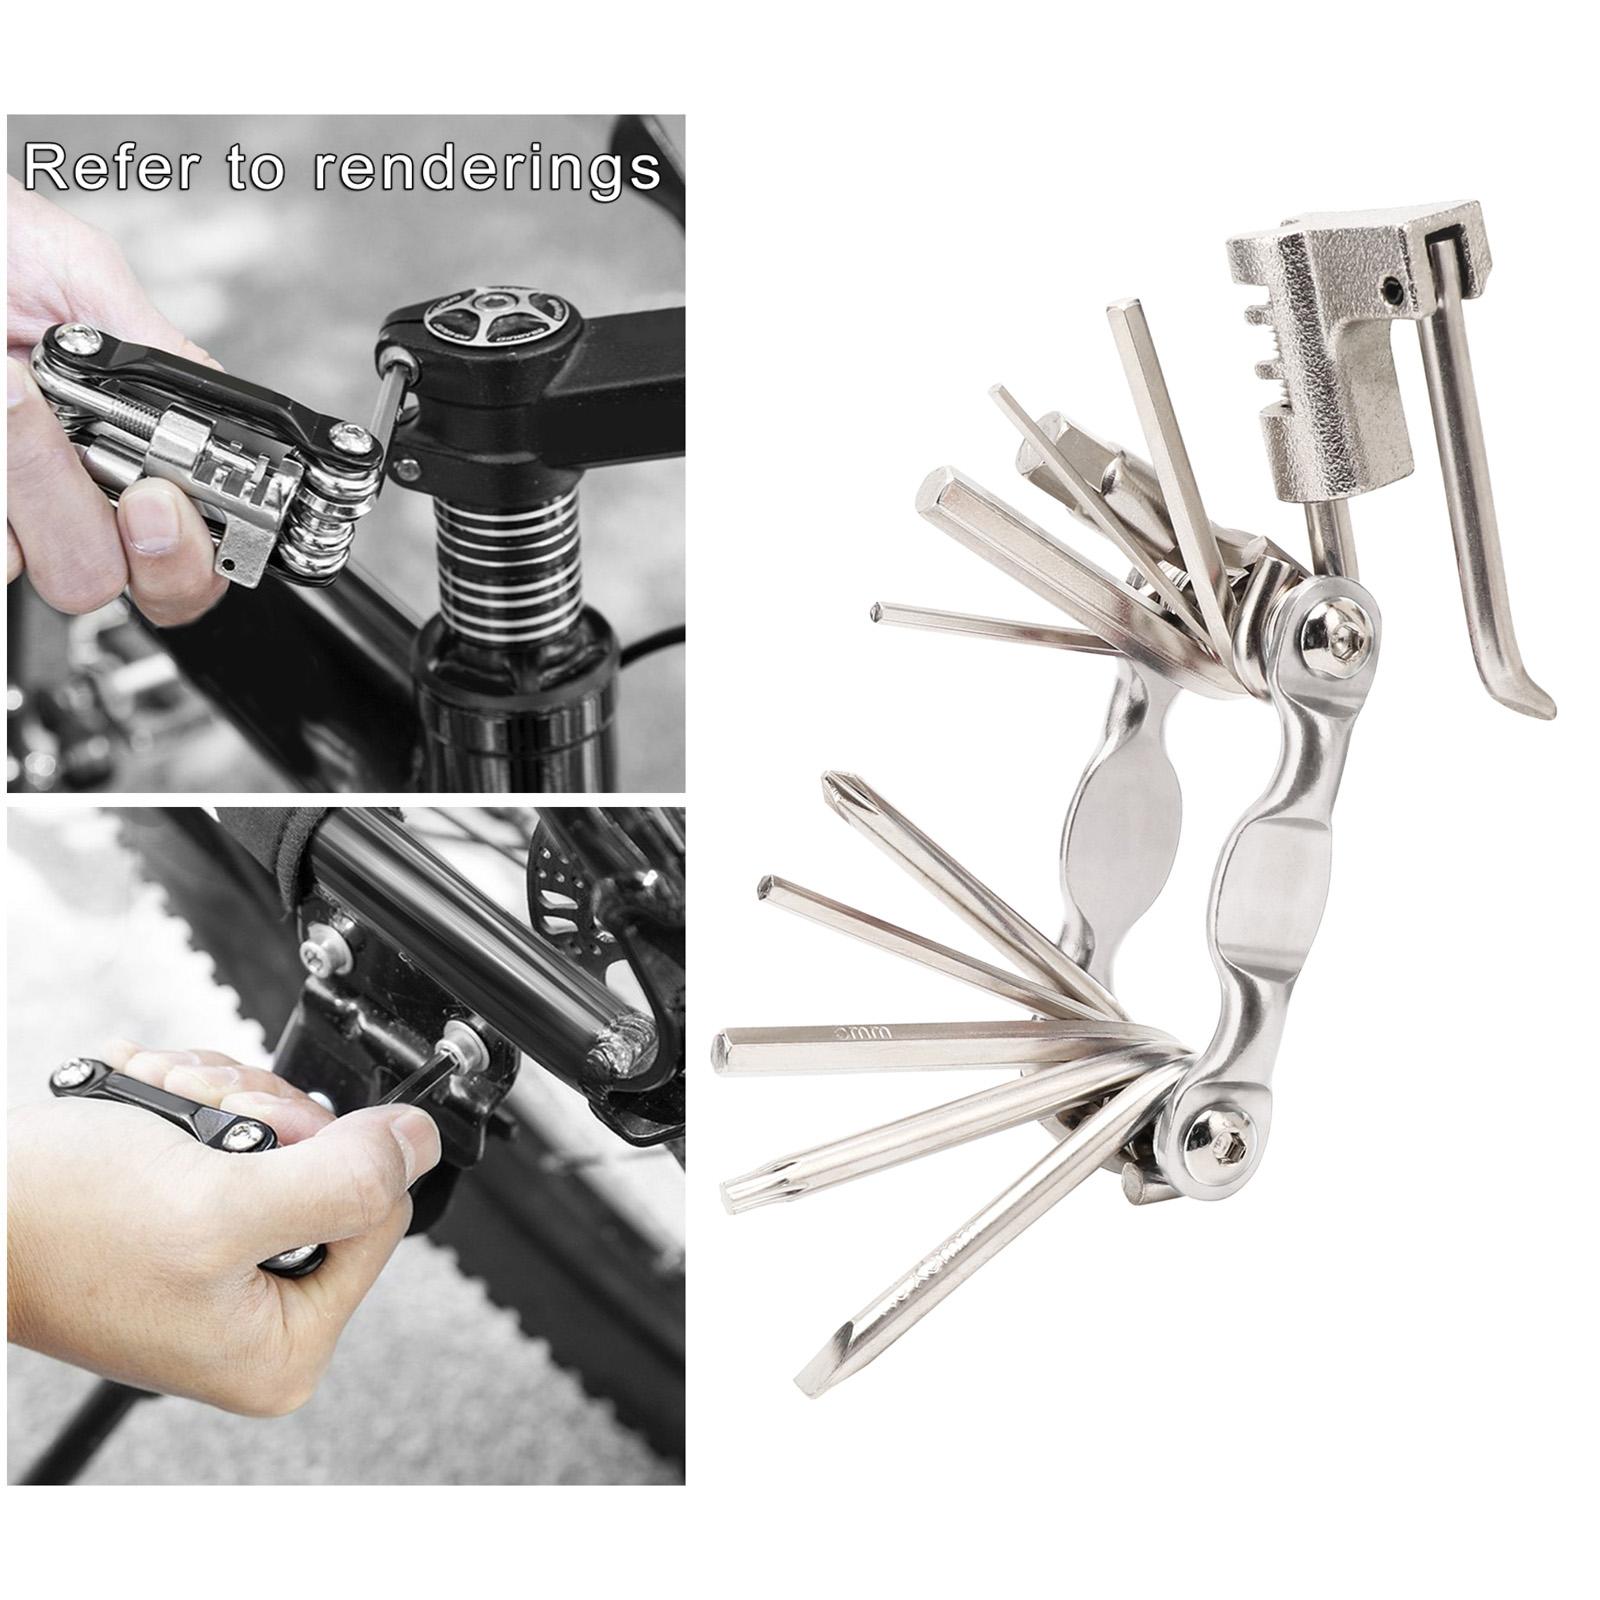 Portable Multifunction Bicycle Repair Tool Set 11 in 1 for Motorcycle silver